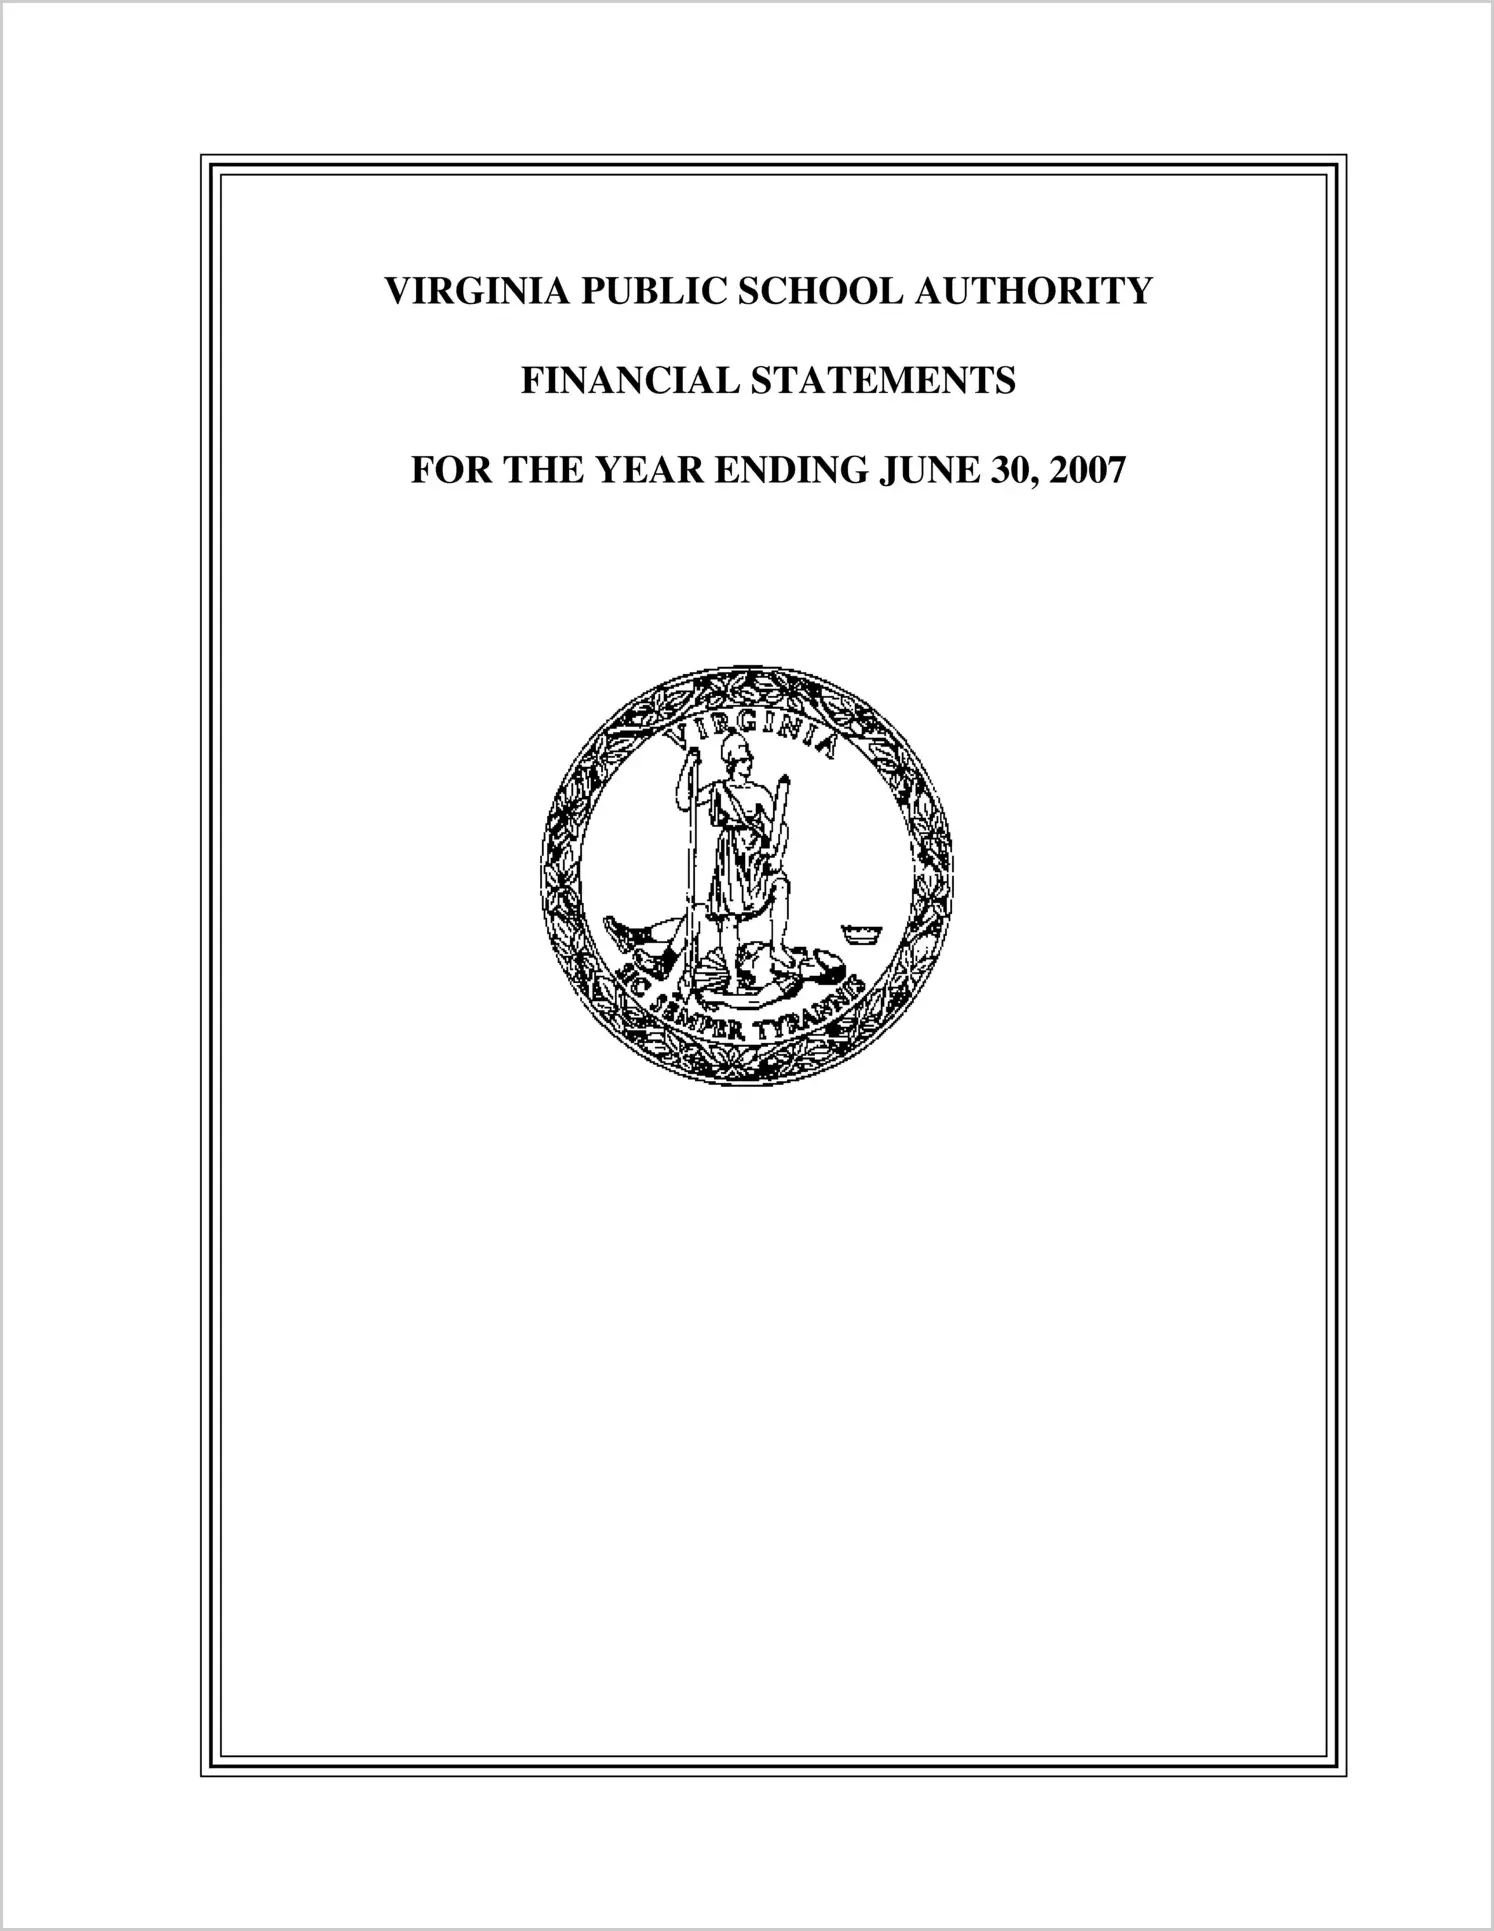 Virginia Public School Authority Financial Statements for the year ended June 30, 2007